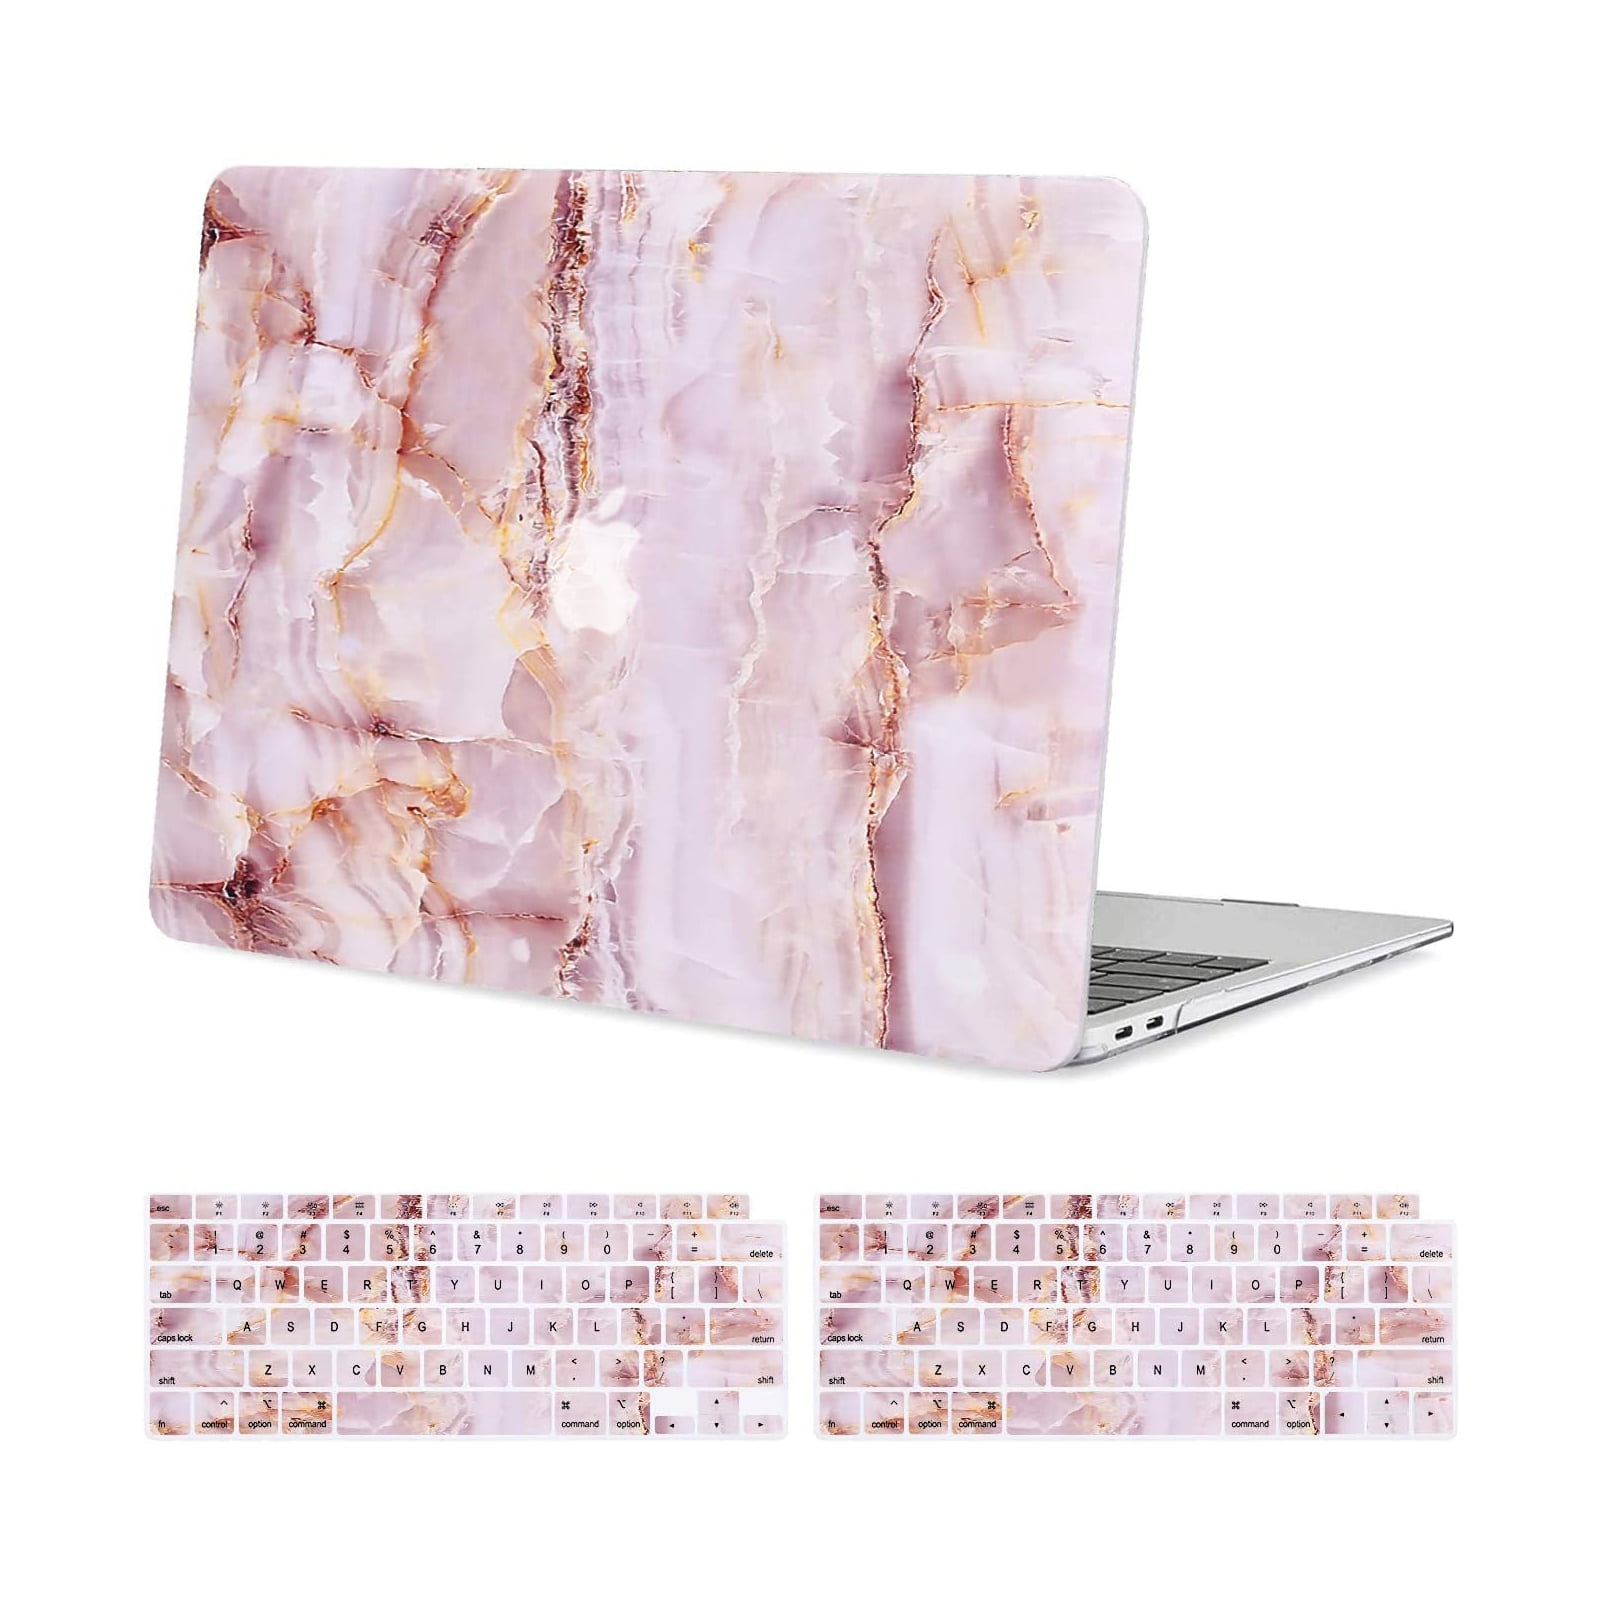 FRIENDLY COW PU Leather Hard Shell Cover for MacBook Pro 13 Retina by Jelli Case 